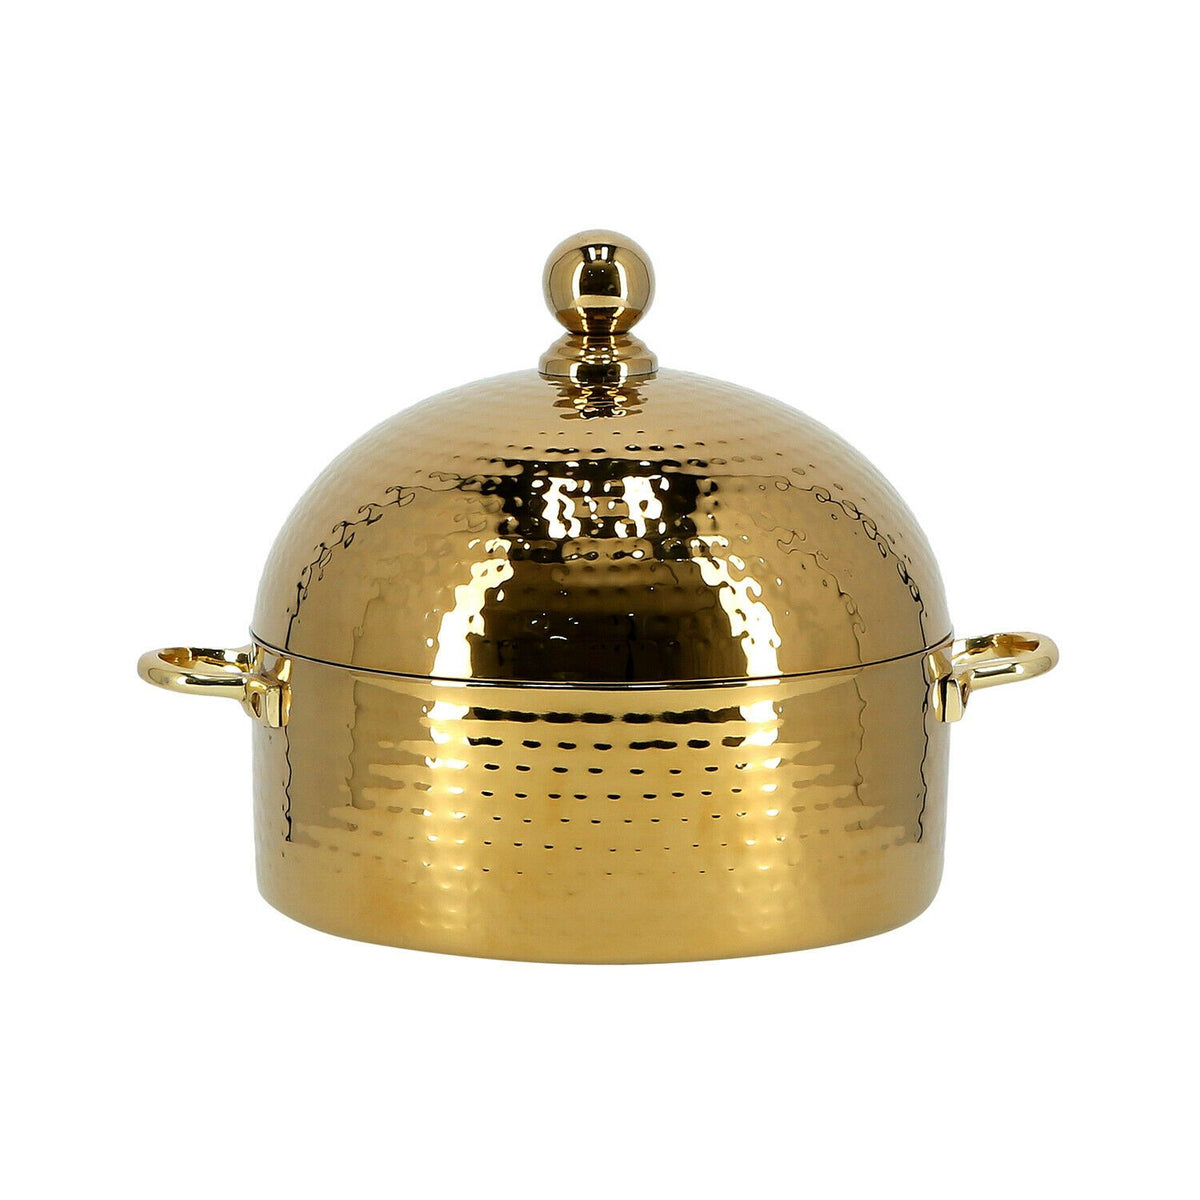 Gold Plated Food Warmer Serving Dish (4L) Kitchen Fixtures Royalford 